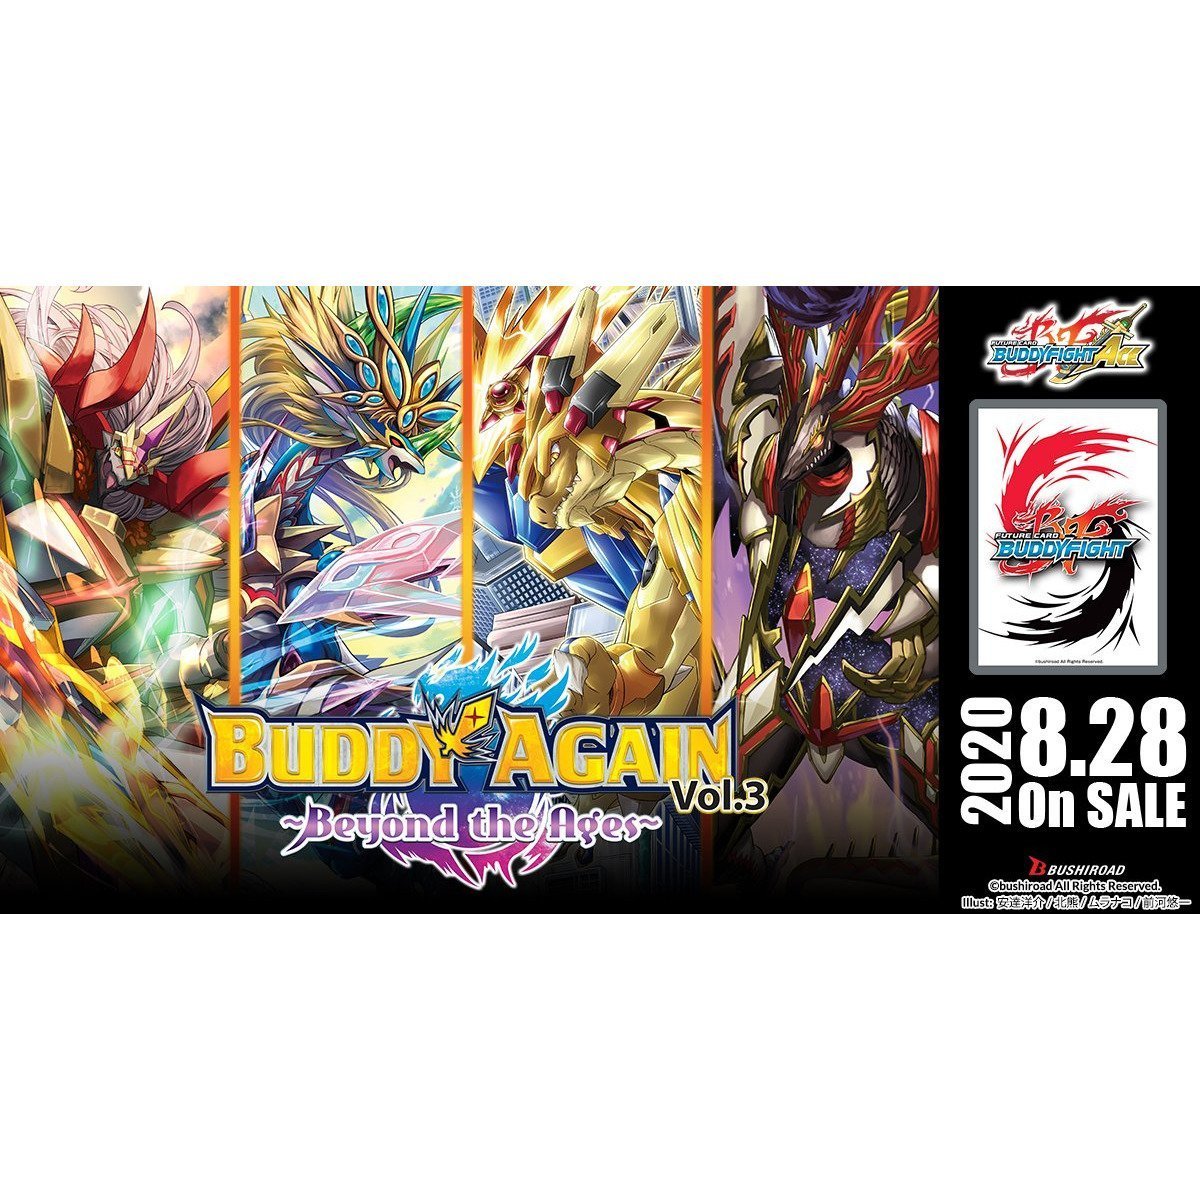 Future Card Buddyfight Ace Ultimate Booster Pack Vol. 5 : Buddy Again Vol. 2 ~ Super Buddy Wars EX ~ [BFE-S-UB05] (English)-Single Pack (Random)-Bushiroad-Ace Cards &amp; Collectibles